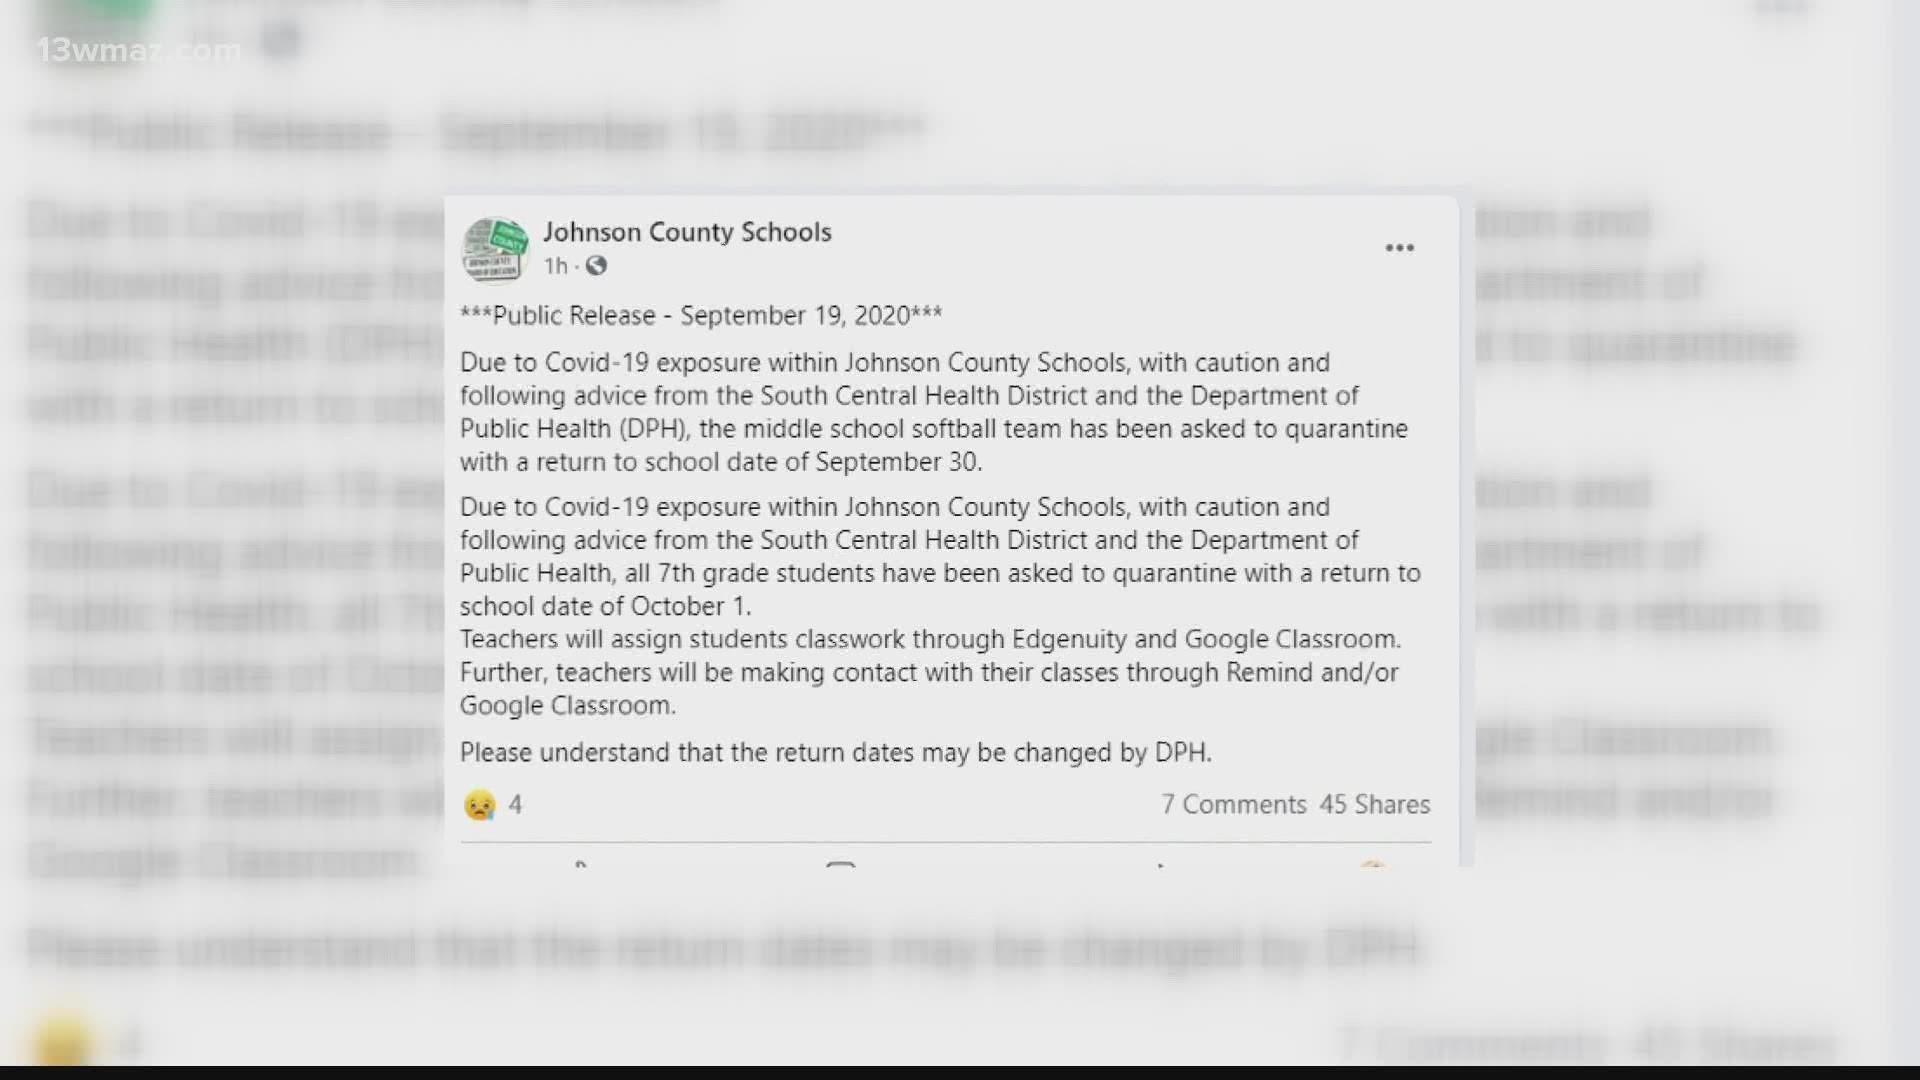 Johnson County Schools say that they are following the advise of the South Central Health District and the DPH to quarantine the students.